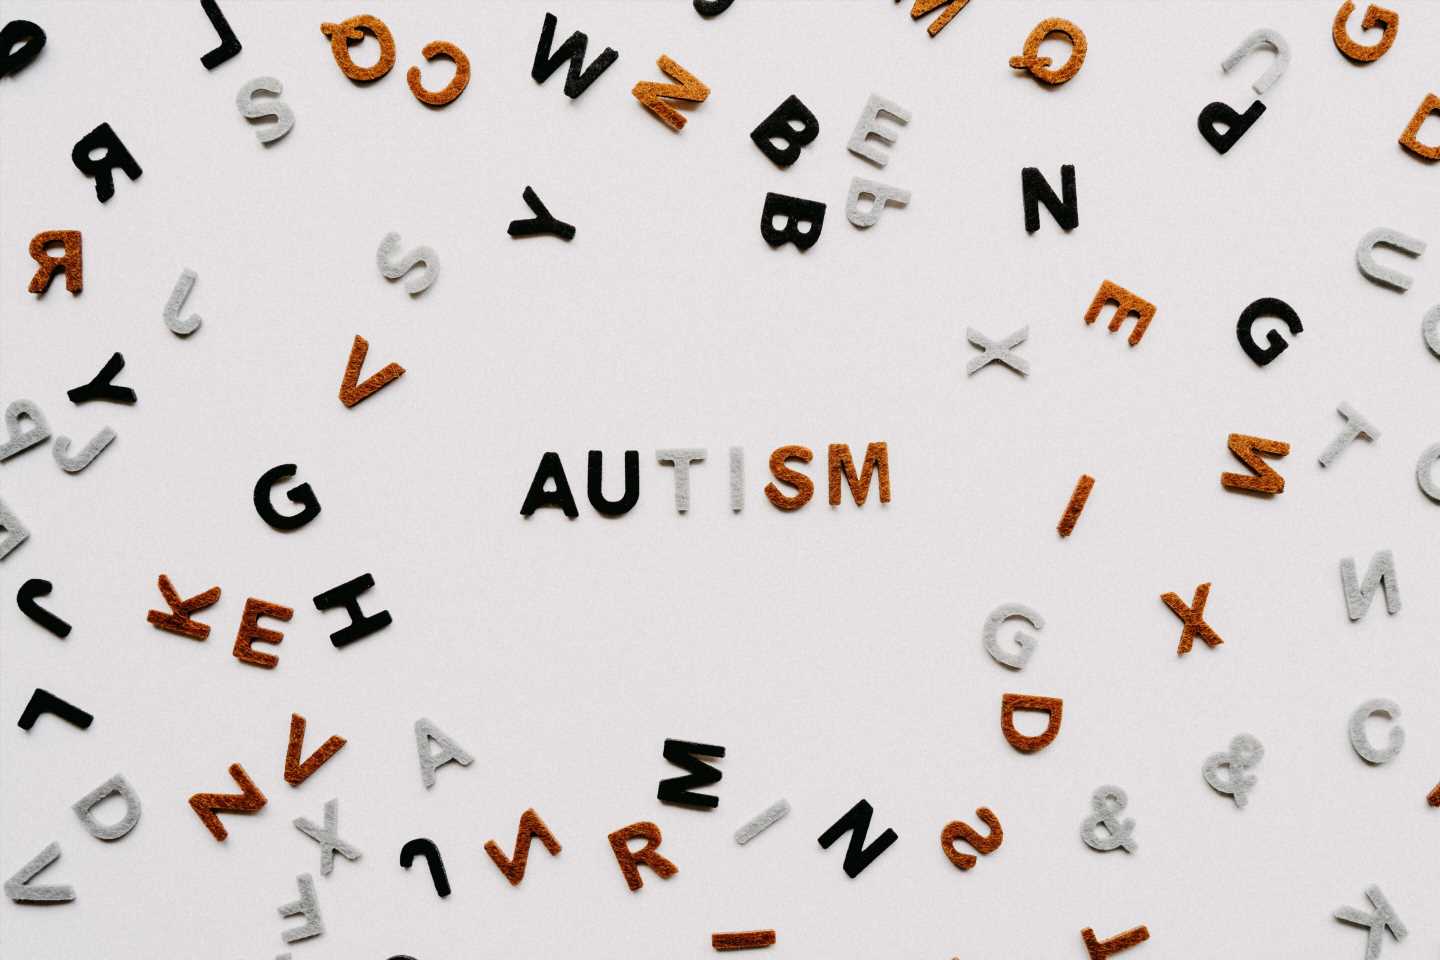 IQ changes over time may help track development, guide intervention in autistic youth